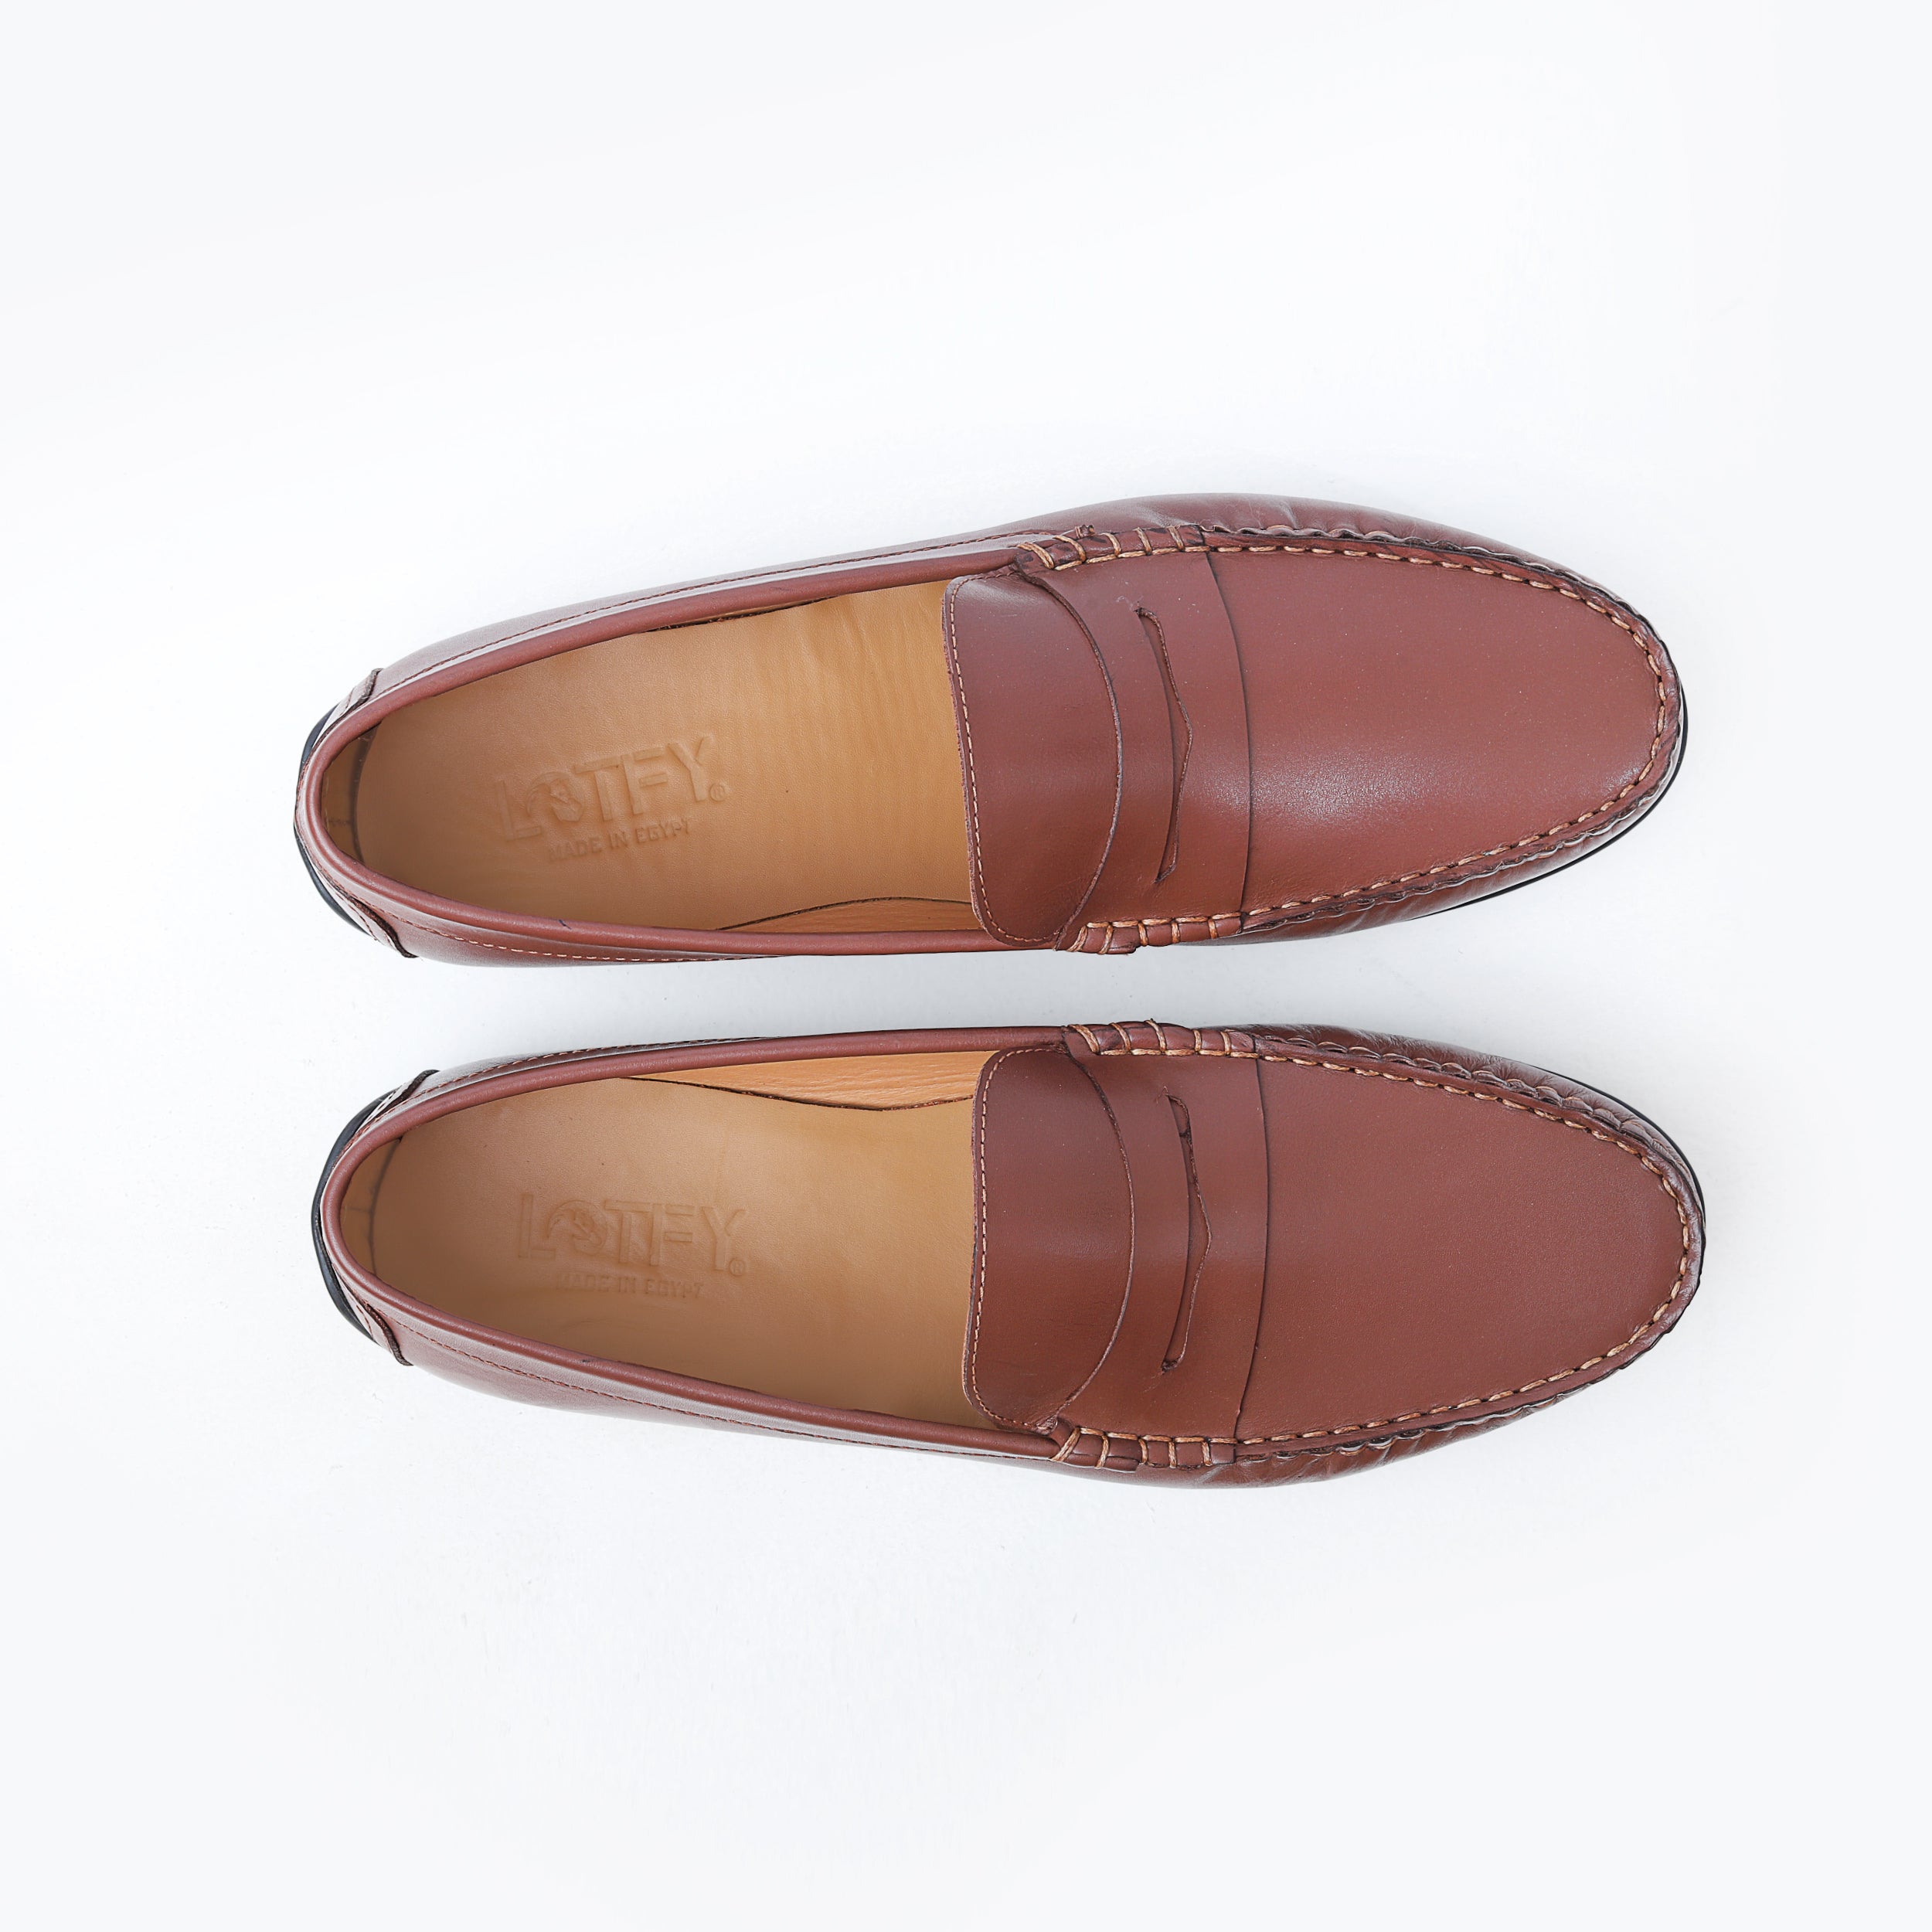 Lotfy Flat Loafers For Men -277